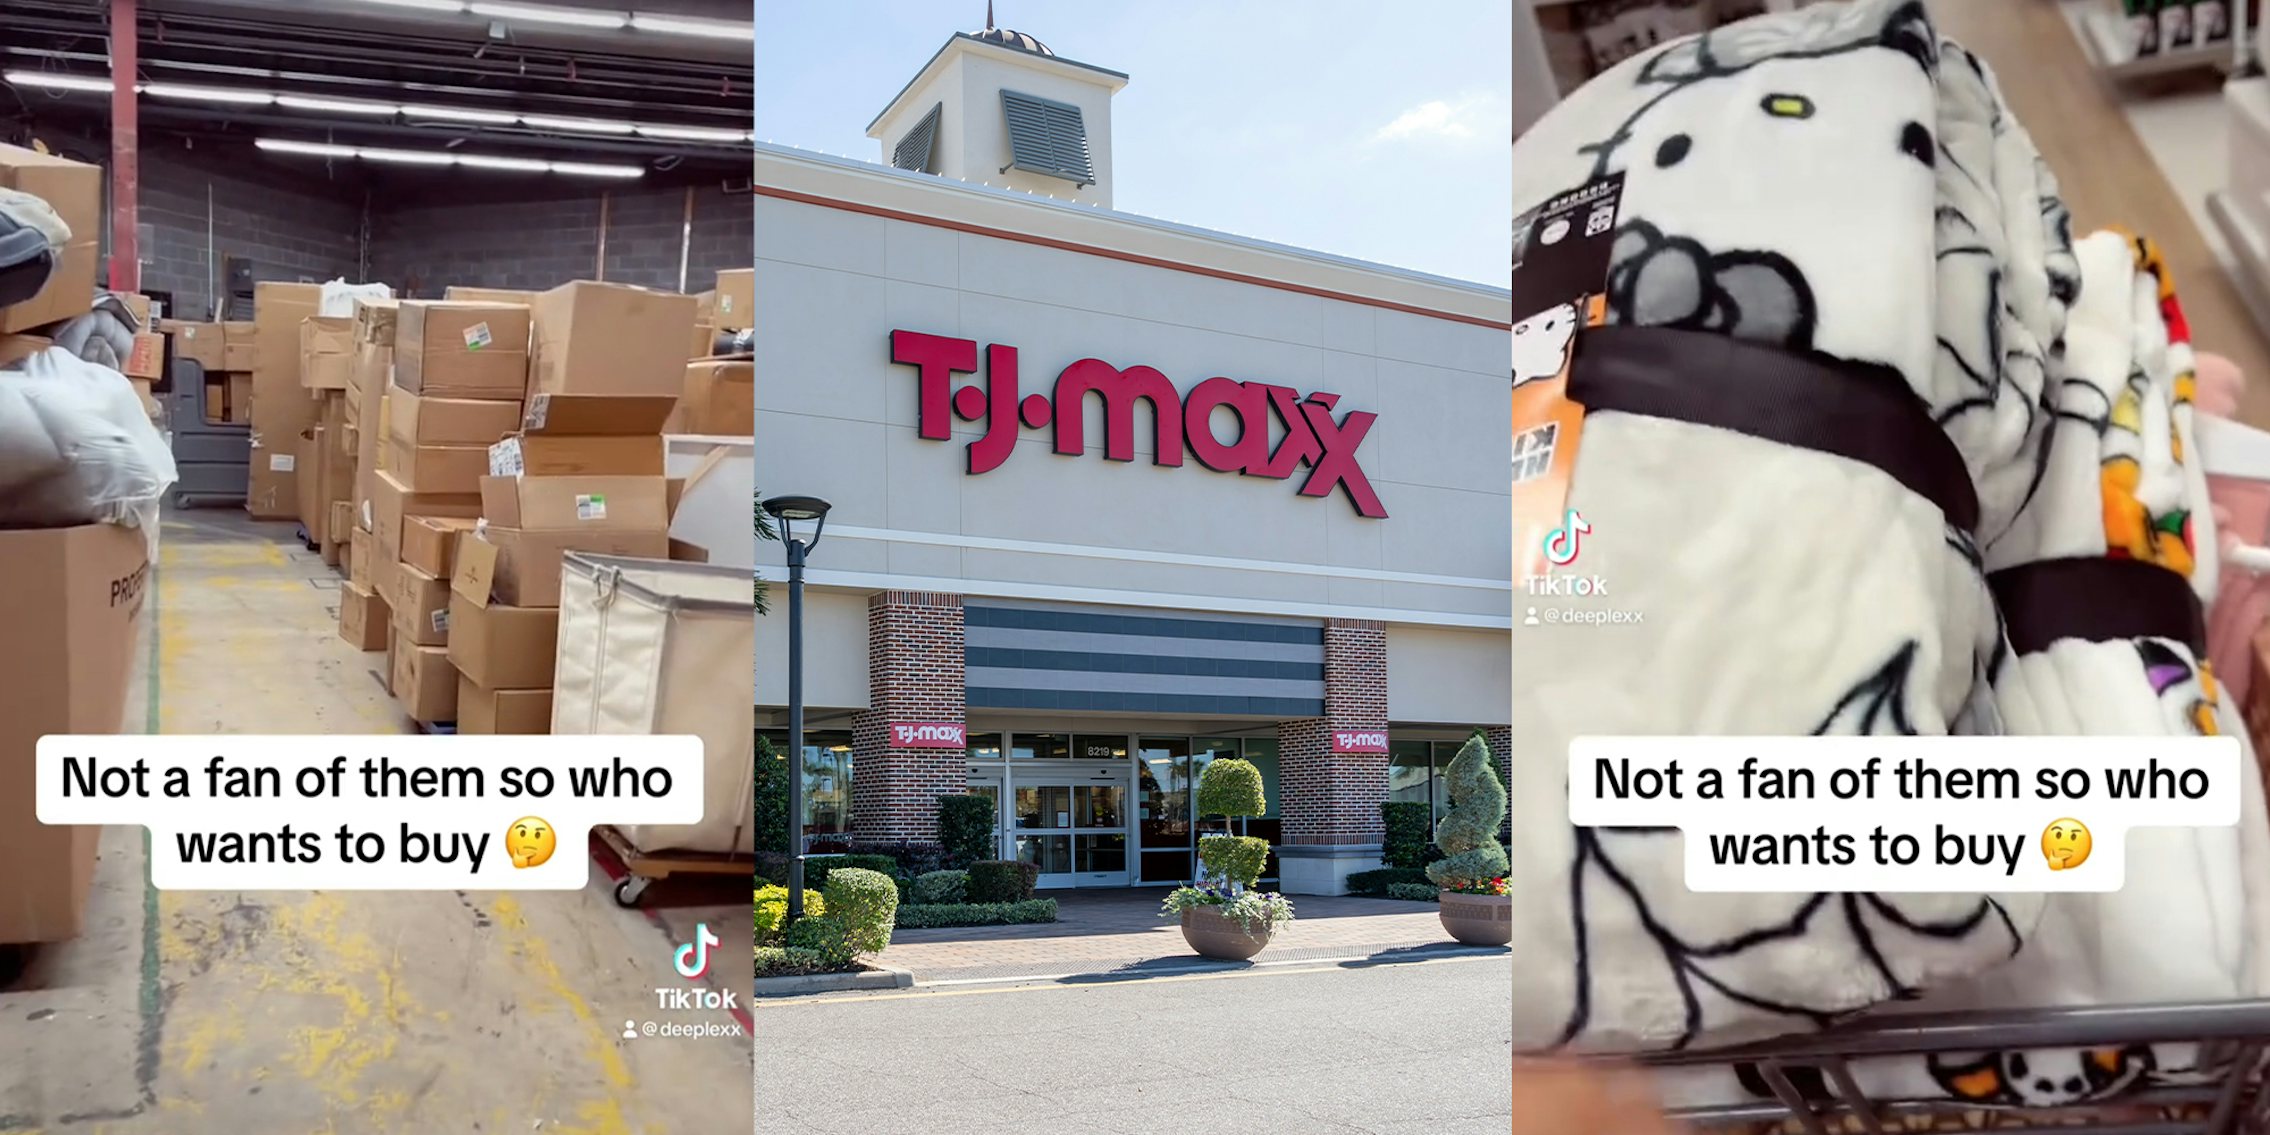 15 AWESOME Ways to Save at T.J.Maxx